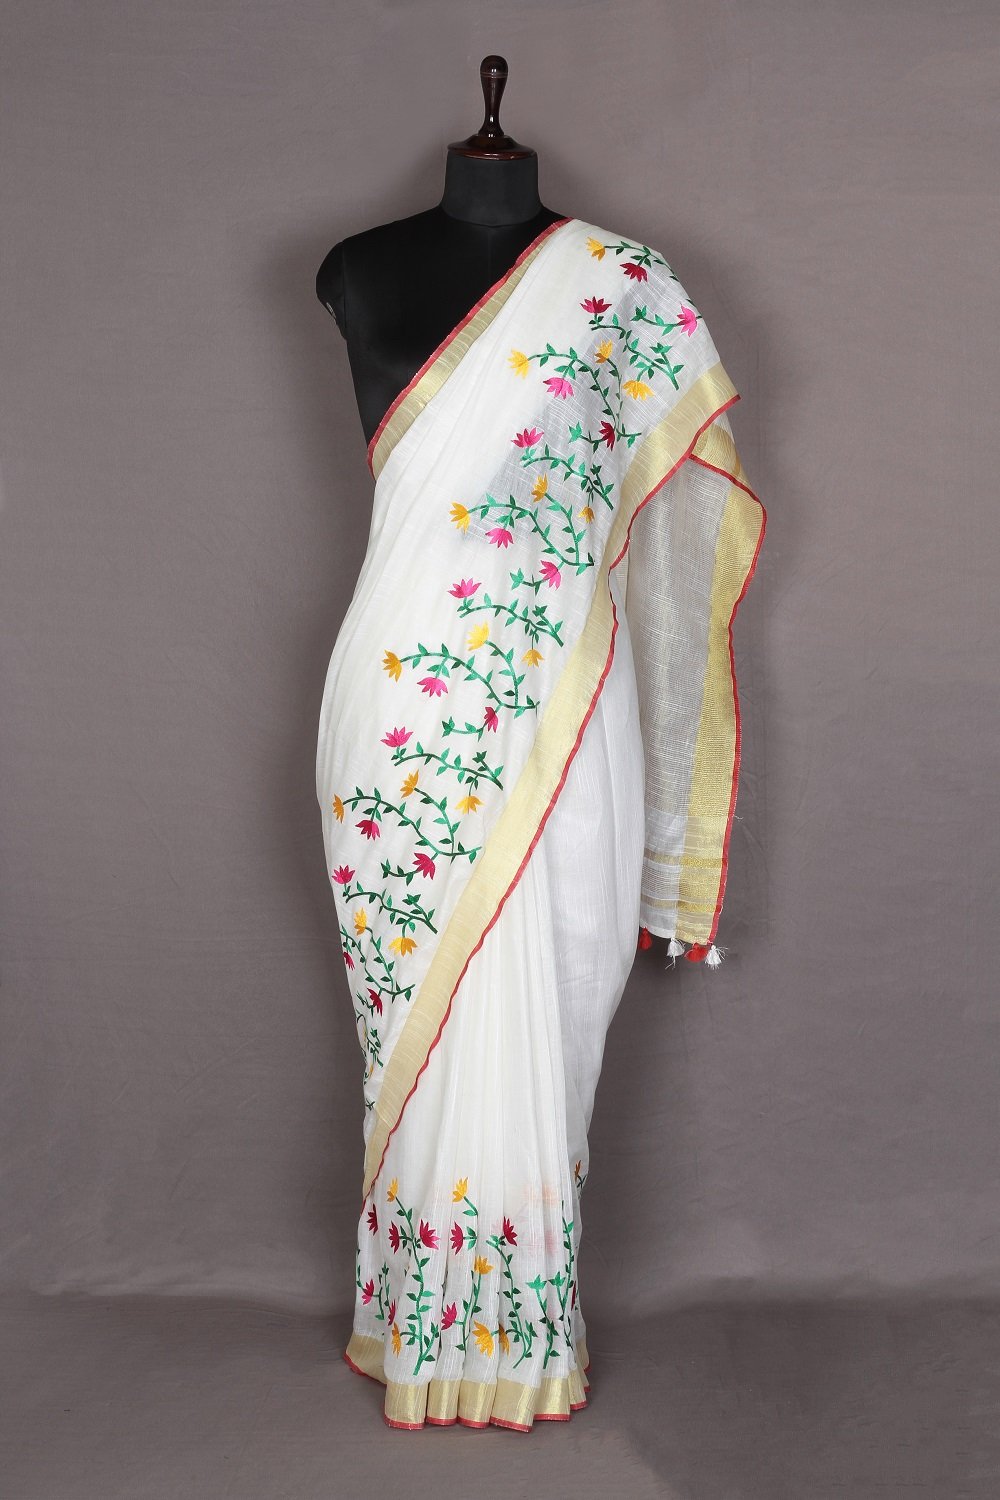 White shade Handwoven Organic Linen Saree with Embroidery Work | KIHUMS Saree